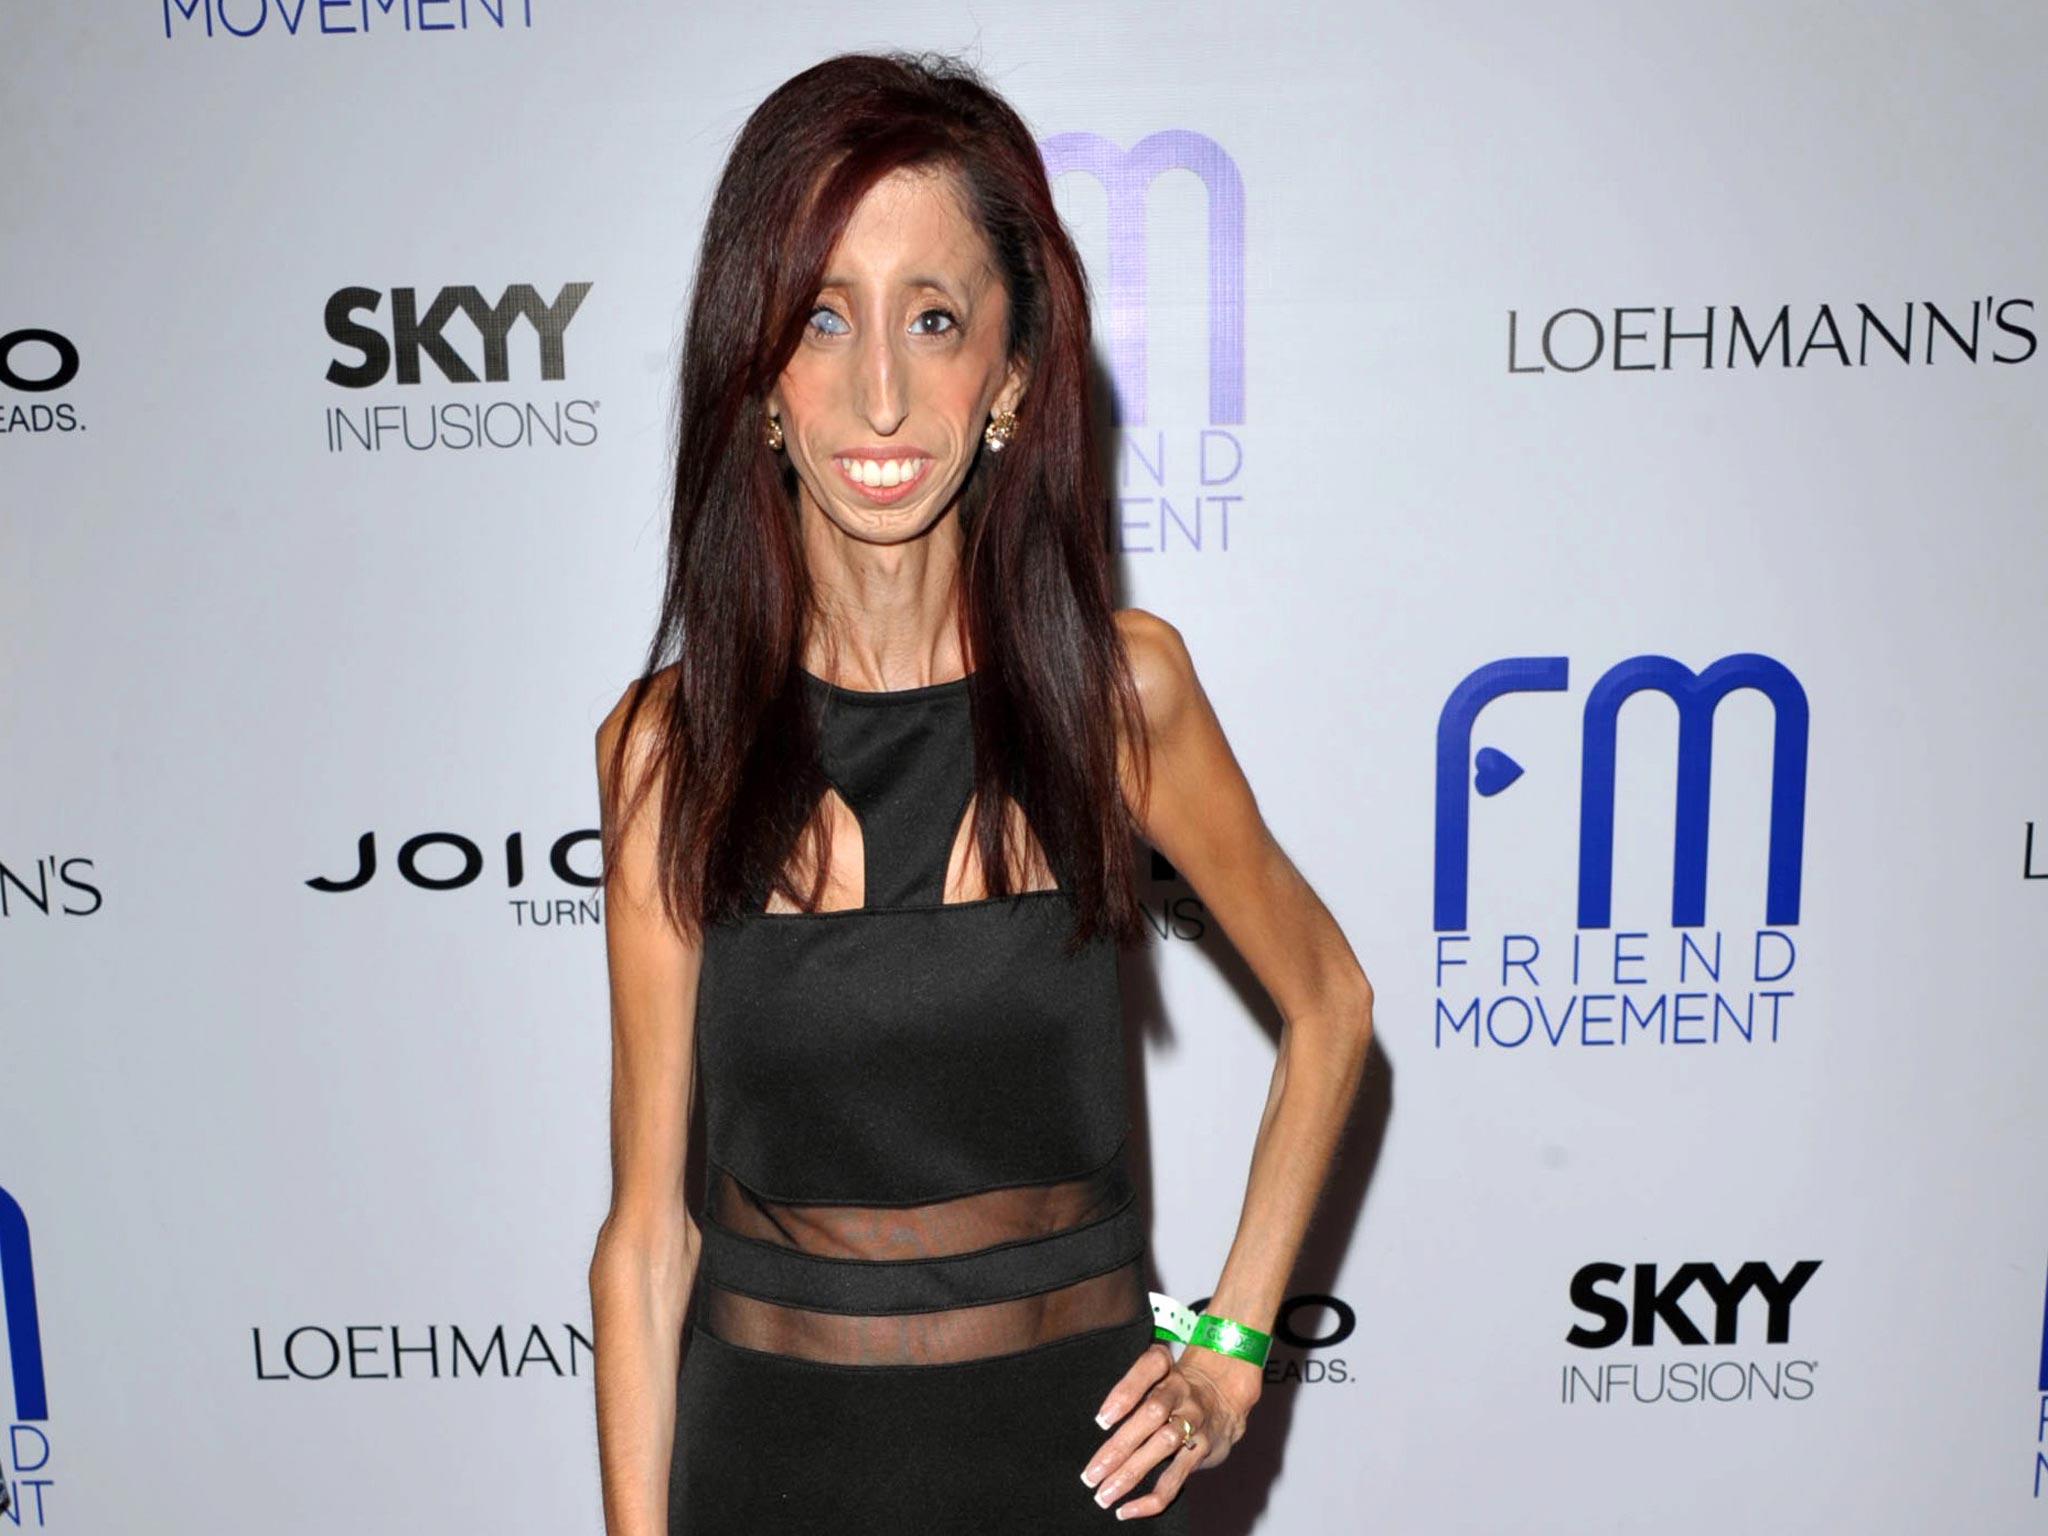 Sxsw 2015 Documentary On Lizzie Velasquez The World S Ugliest Woman Premieres The Independent